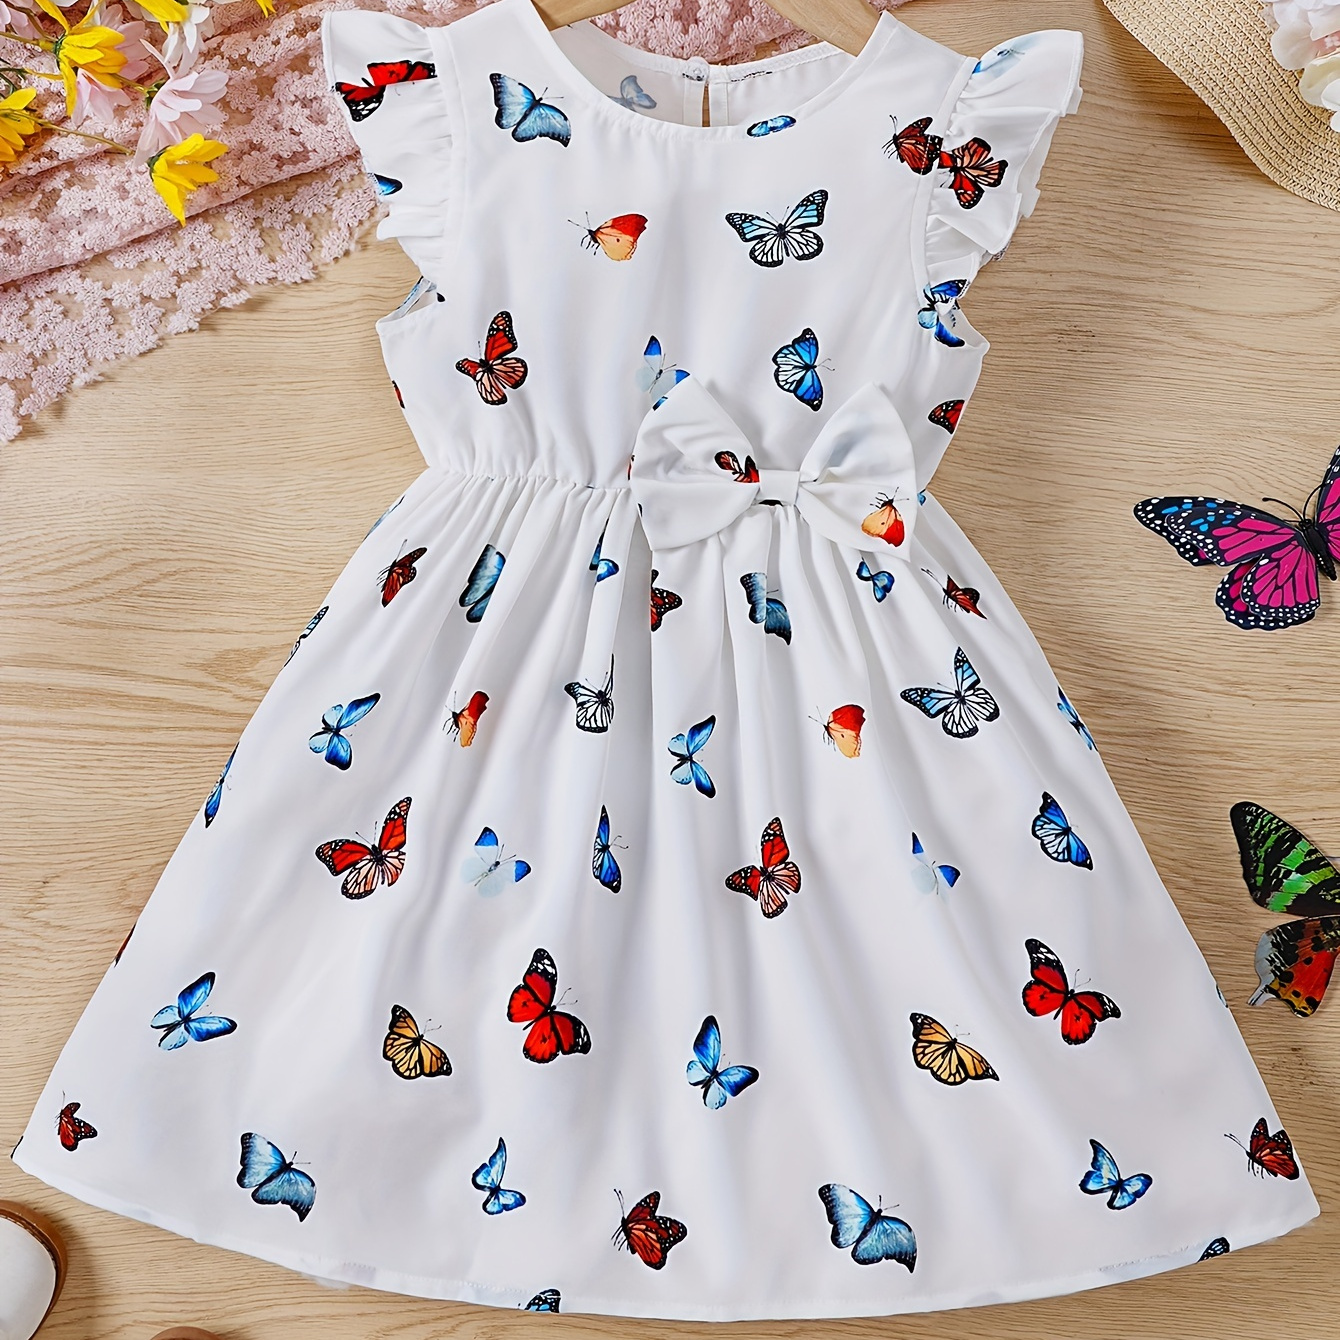 

Cute Girls Flying Sleeve Butterfly Print Bowknot Sweet Casual Dress For Summer